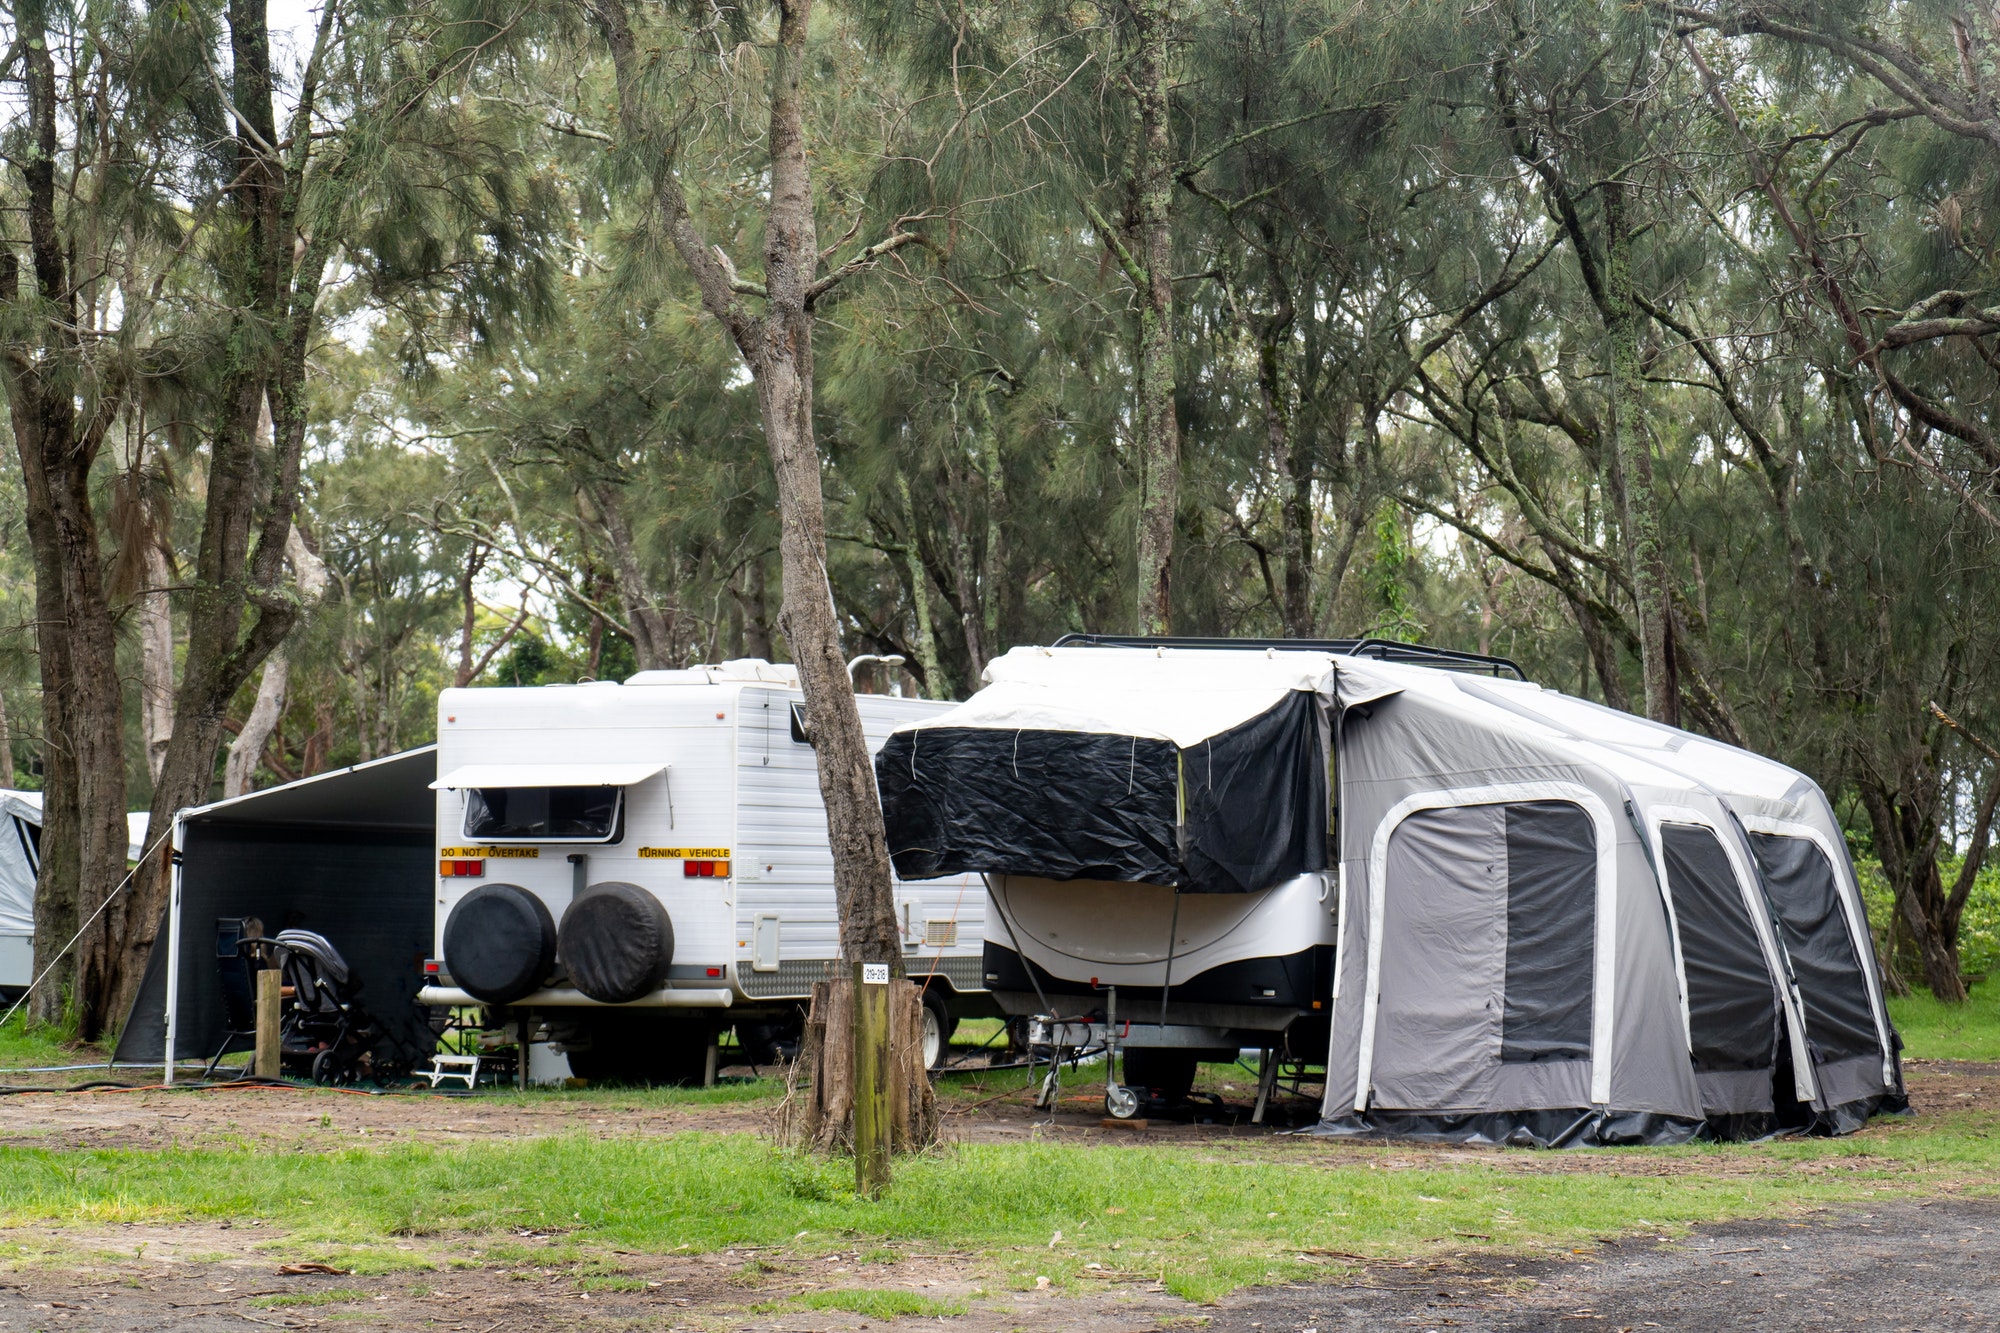 RV Caravans motor homes with awnings at the camping site in the bush. Family camping in Australia